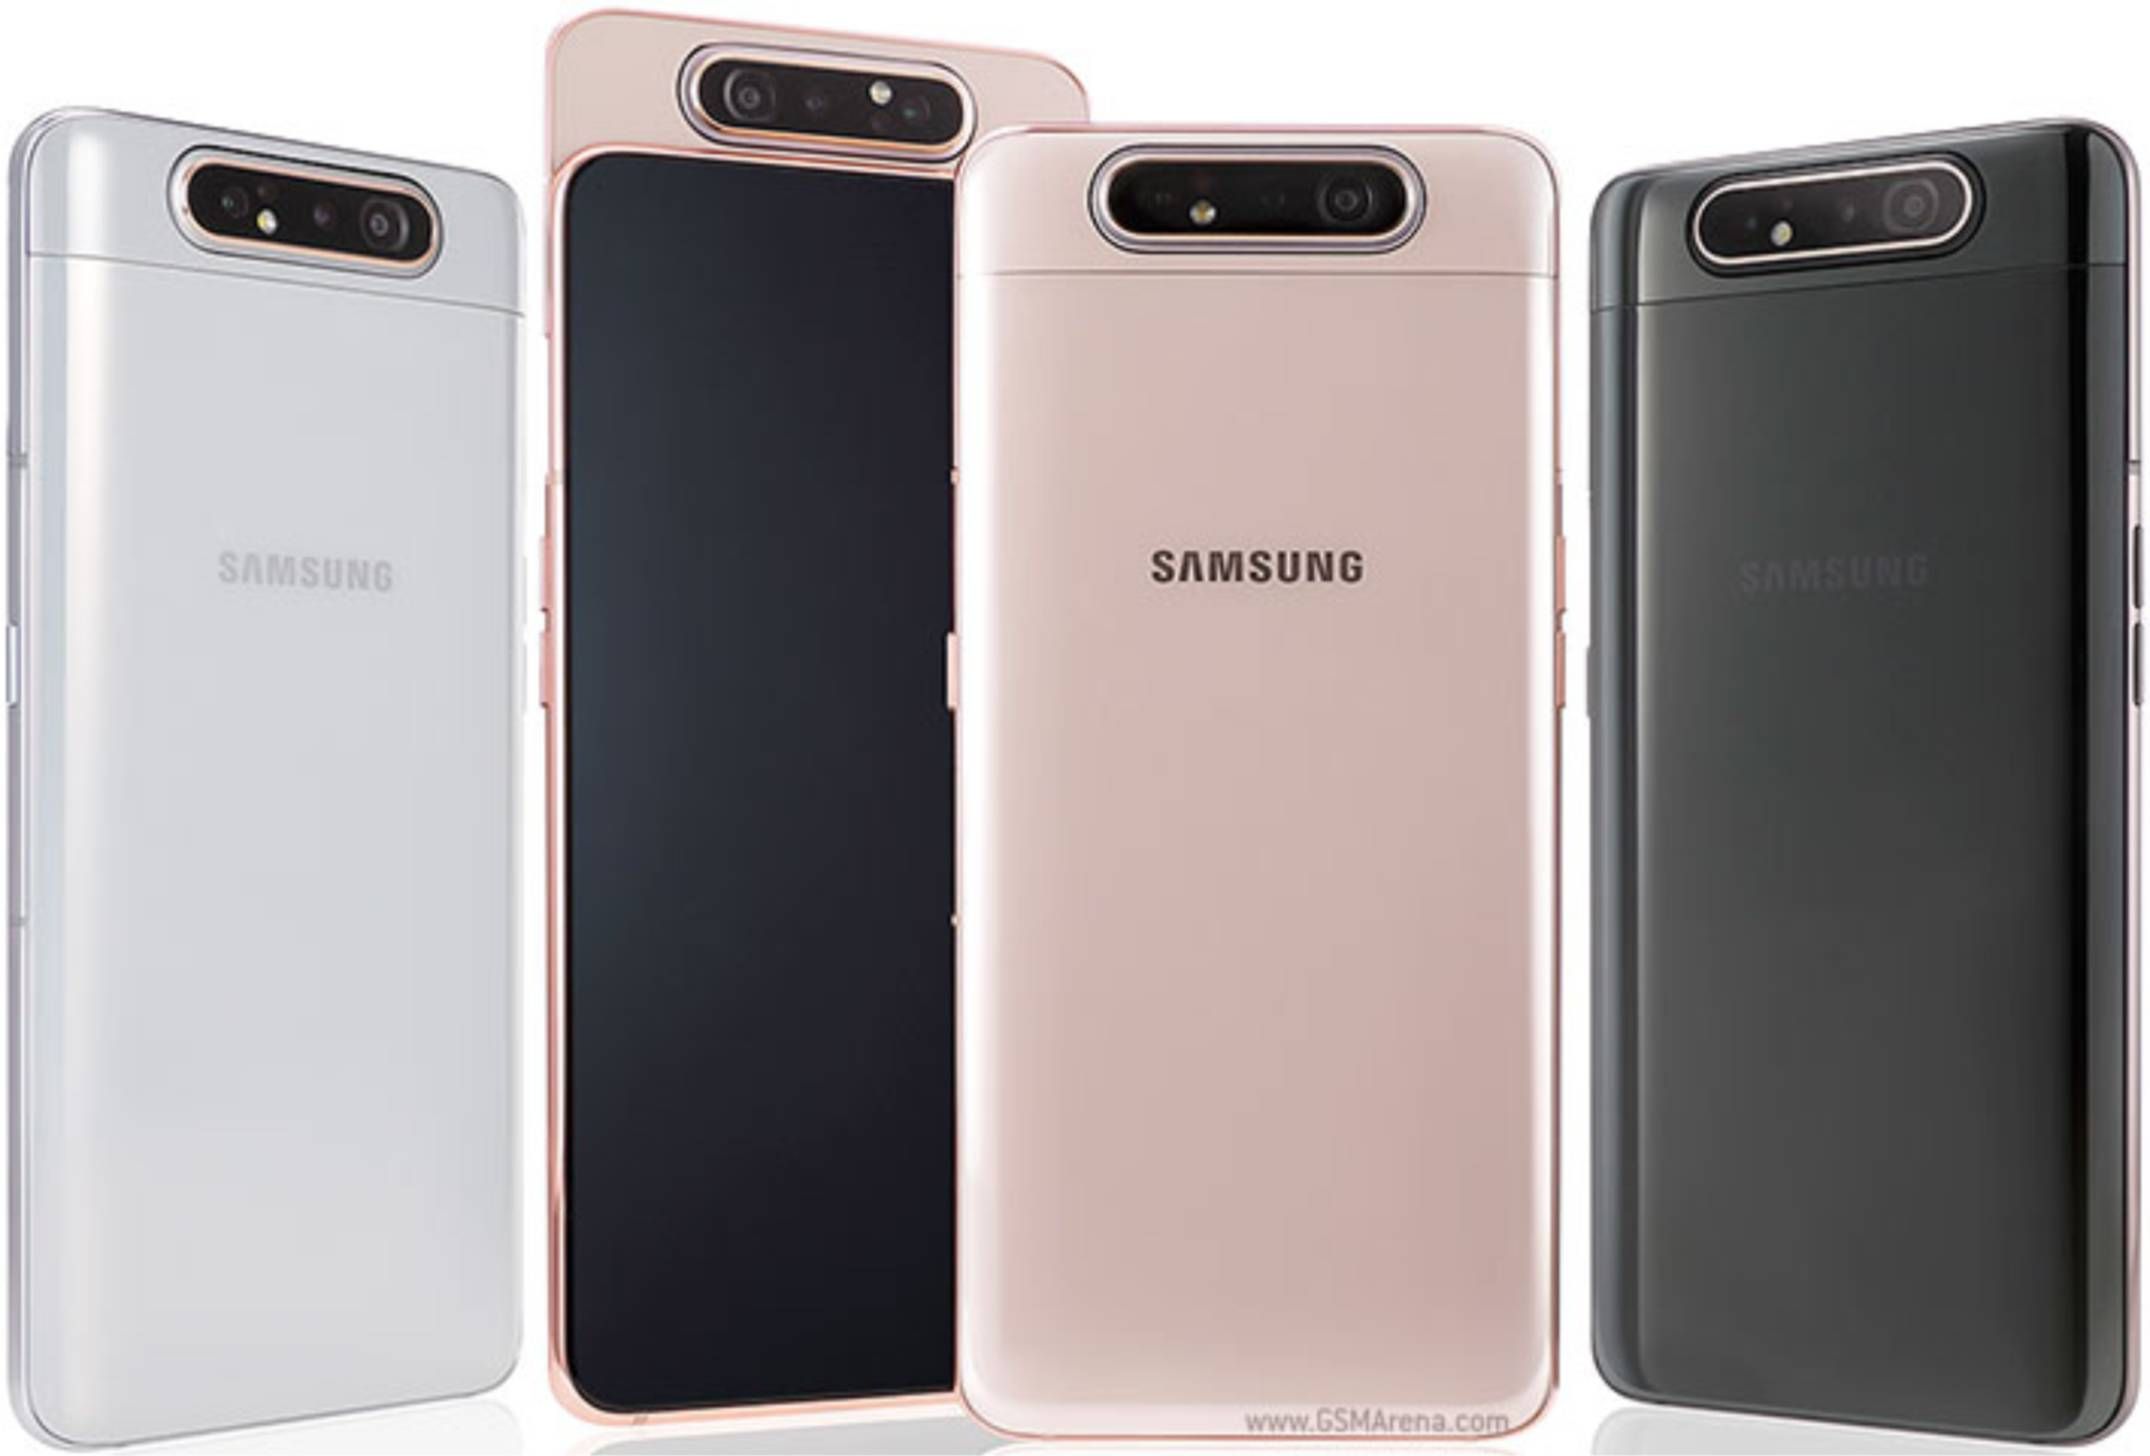 Samsung Galaxy A80 Specifications and Price in Kenya